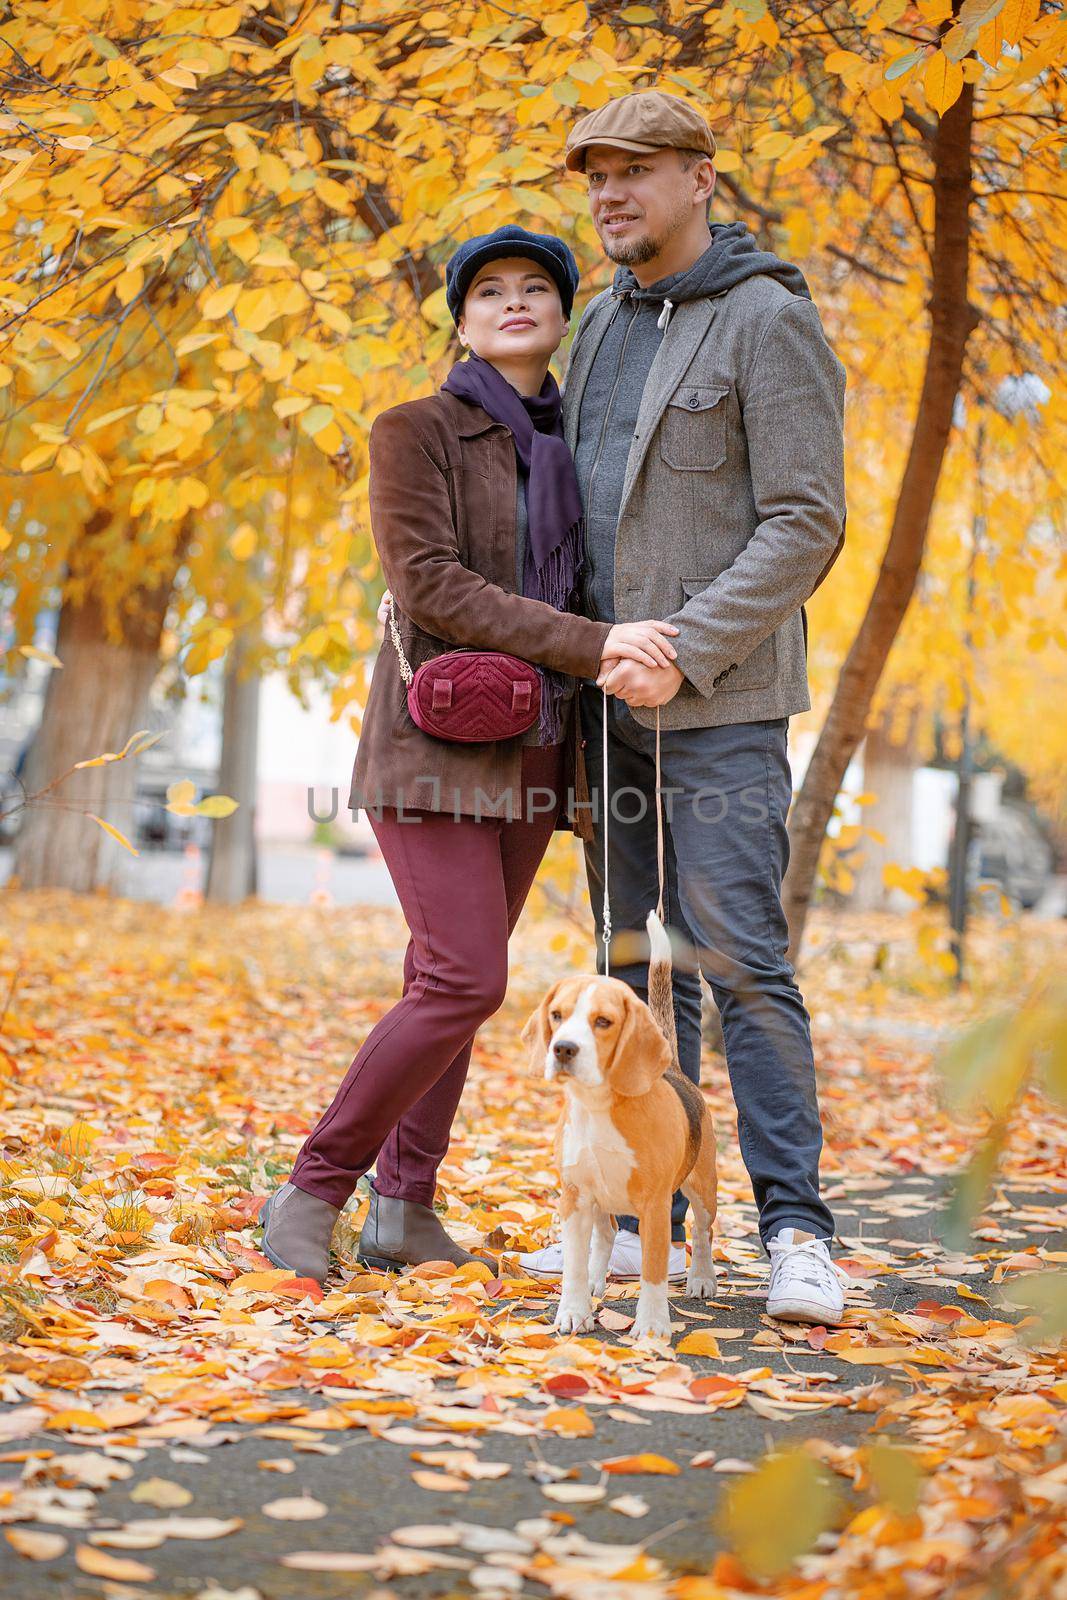 Stylish Pair About 40 Years Old on a Walk in the Fall Park With Their Dog Bigley. They Are Walking the Pooch in the Autumn Morning. Autumn park background. Full-length. High quality photo